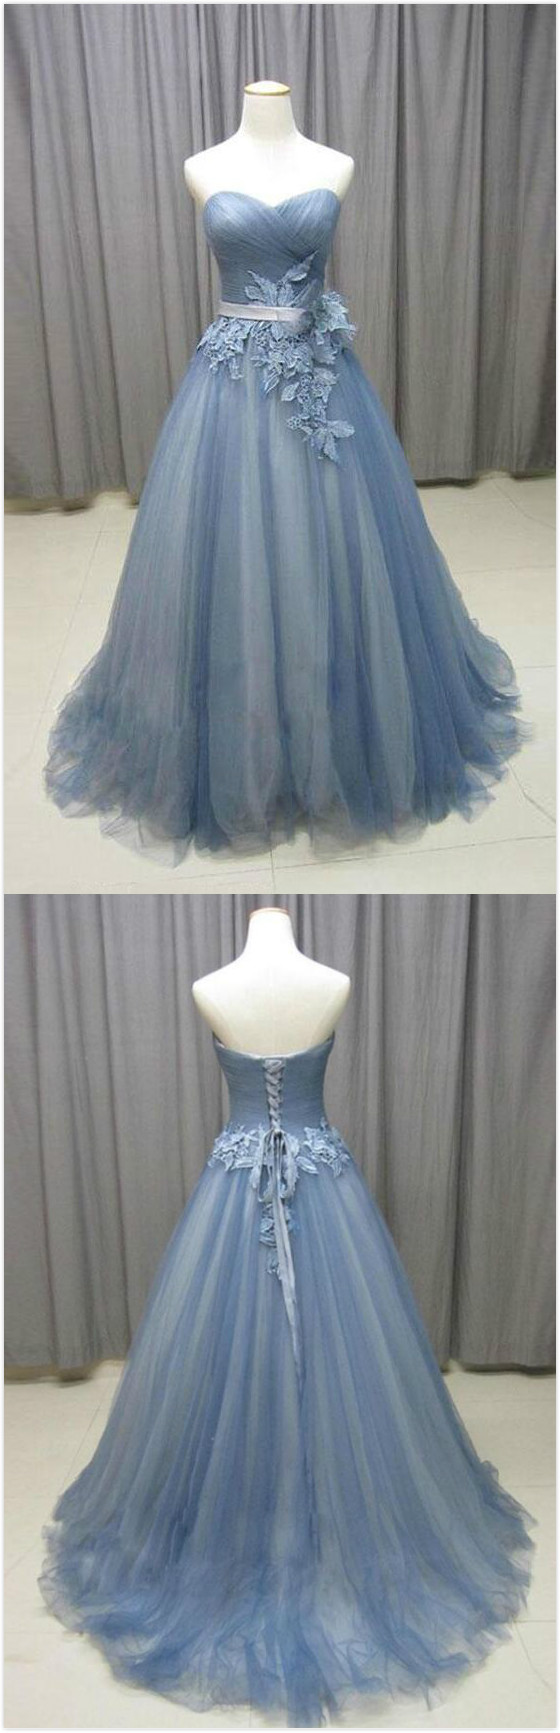 Gray Blue Prom Dress,tulle Prom Dress,simple A-line Prom Dress, Long Prom Dress,sweetheart Lace Long Prom Dress With Appliques